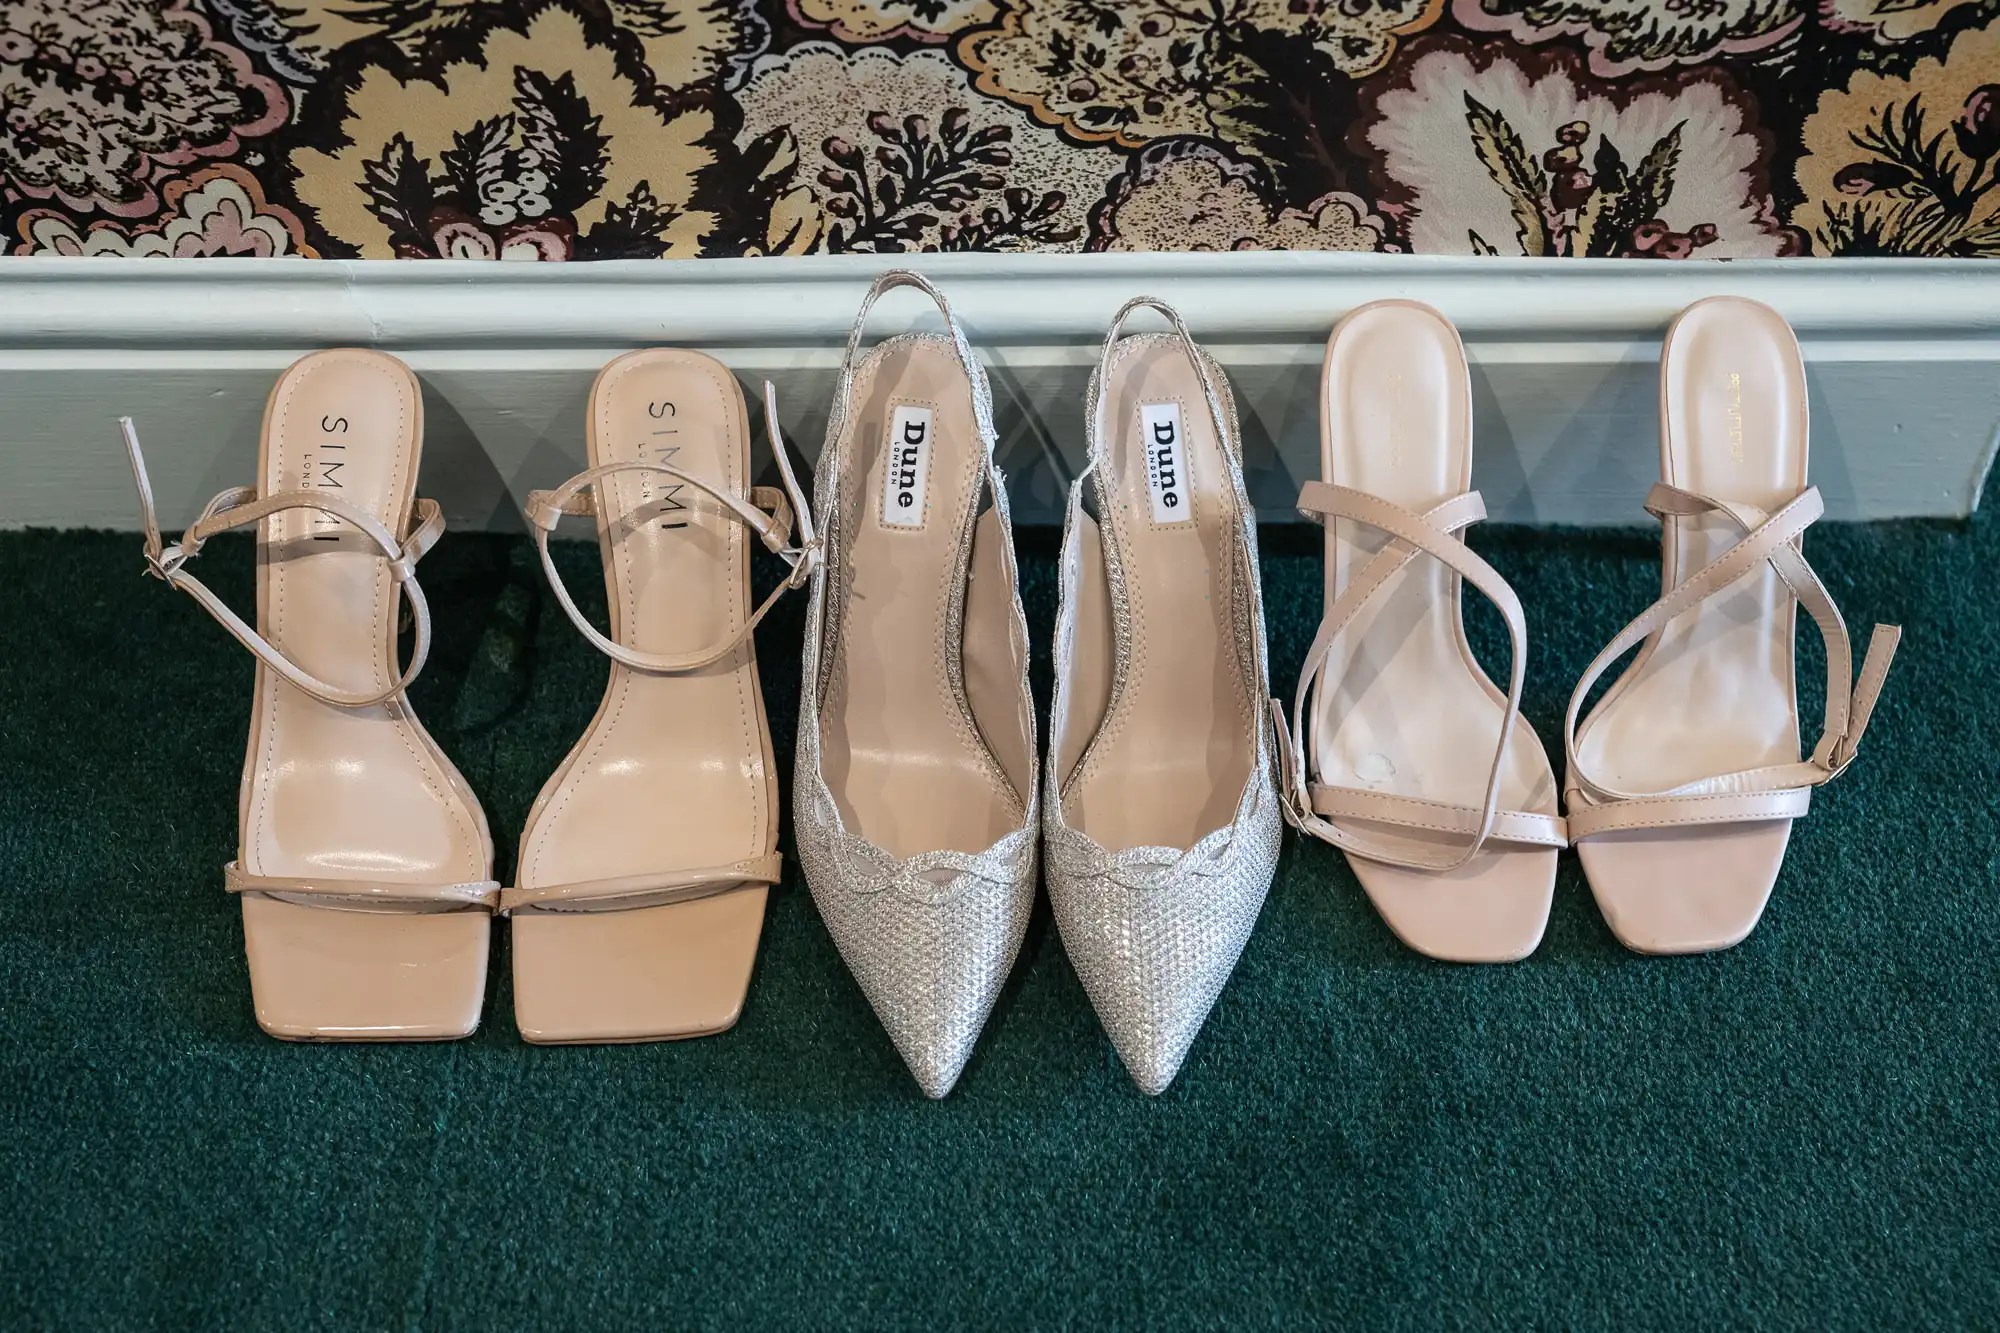 Three pairs of women's shoes, including beige heels and silvery pointed heels, neatly aligned on a green carpet against a floral wall.